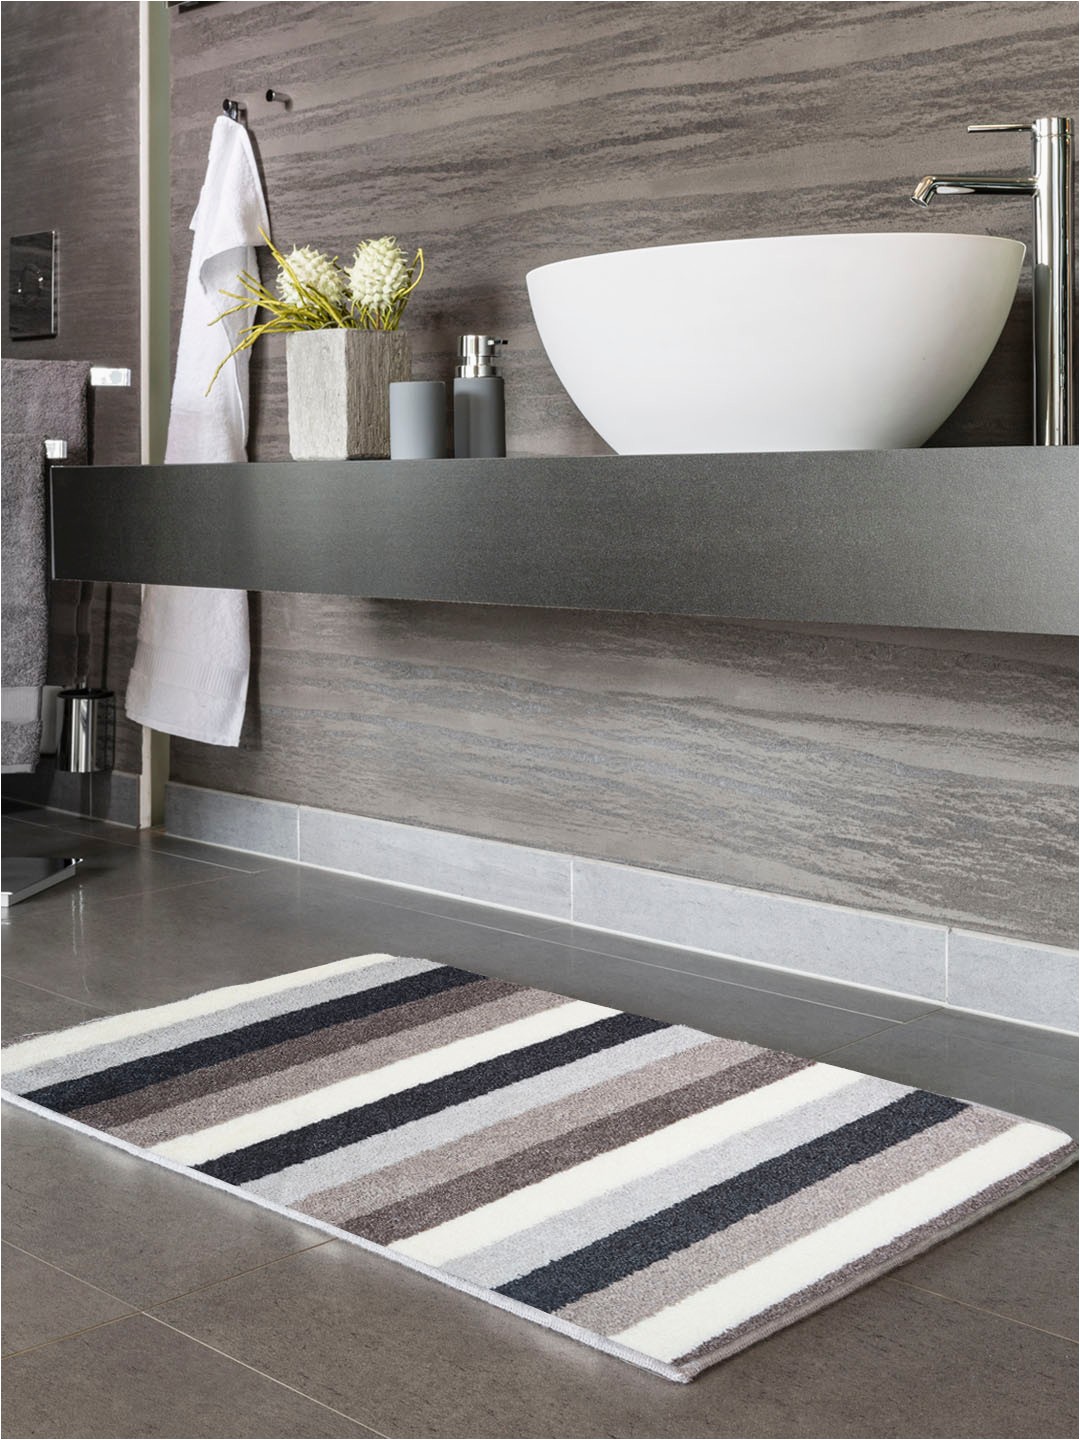 Black and White Striped Bath Rug Obsessions Black & White Striped Bath Rug